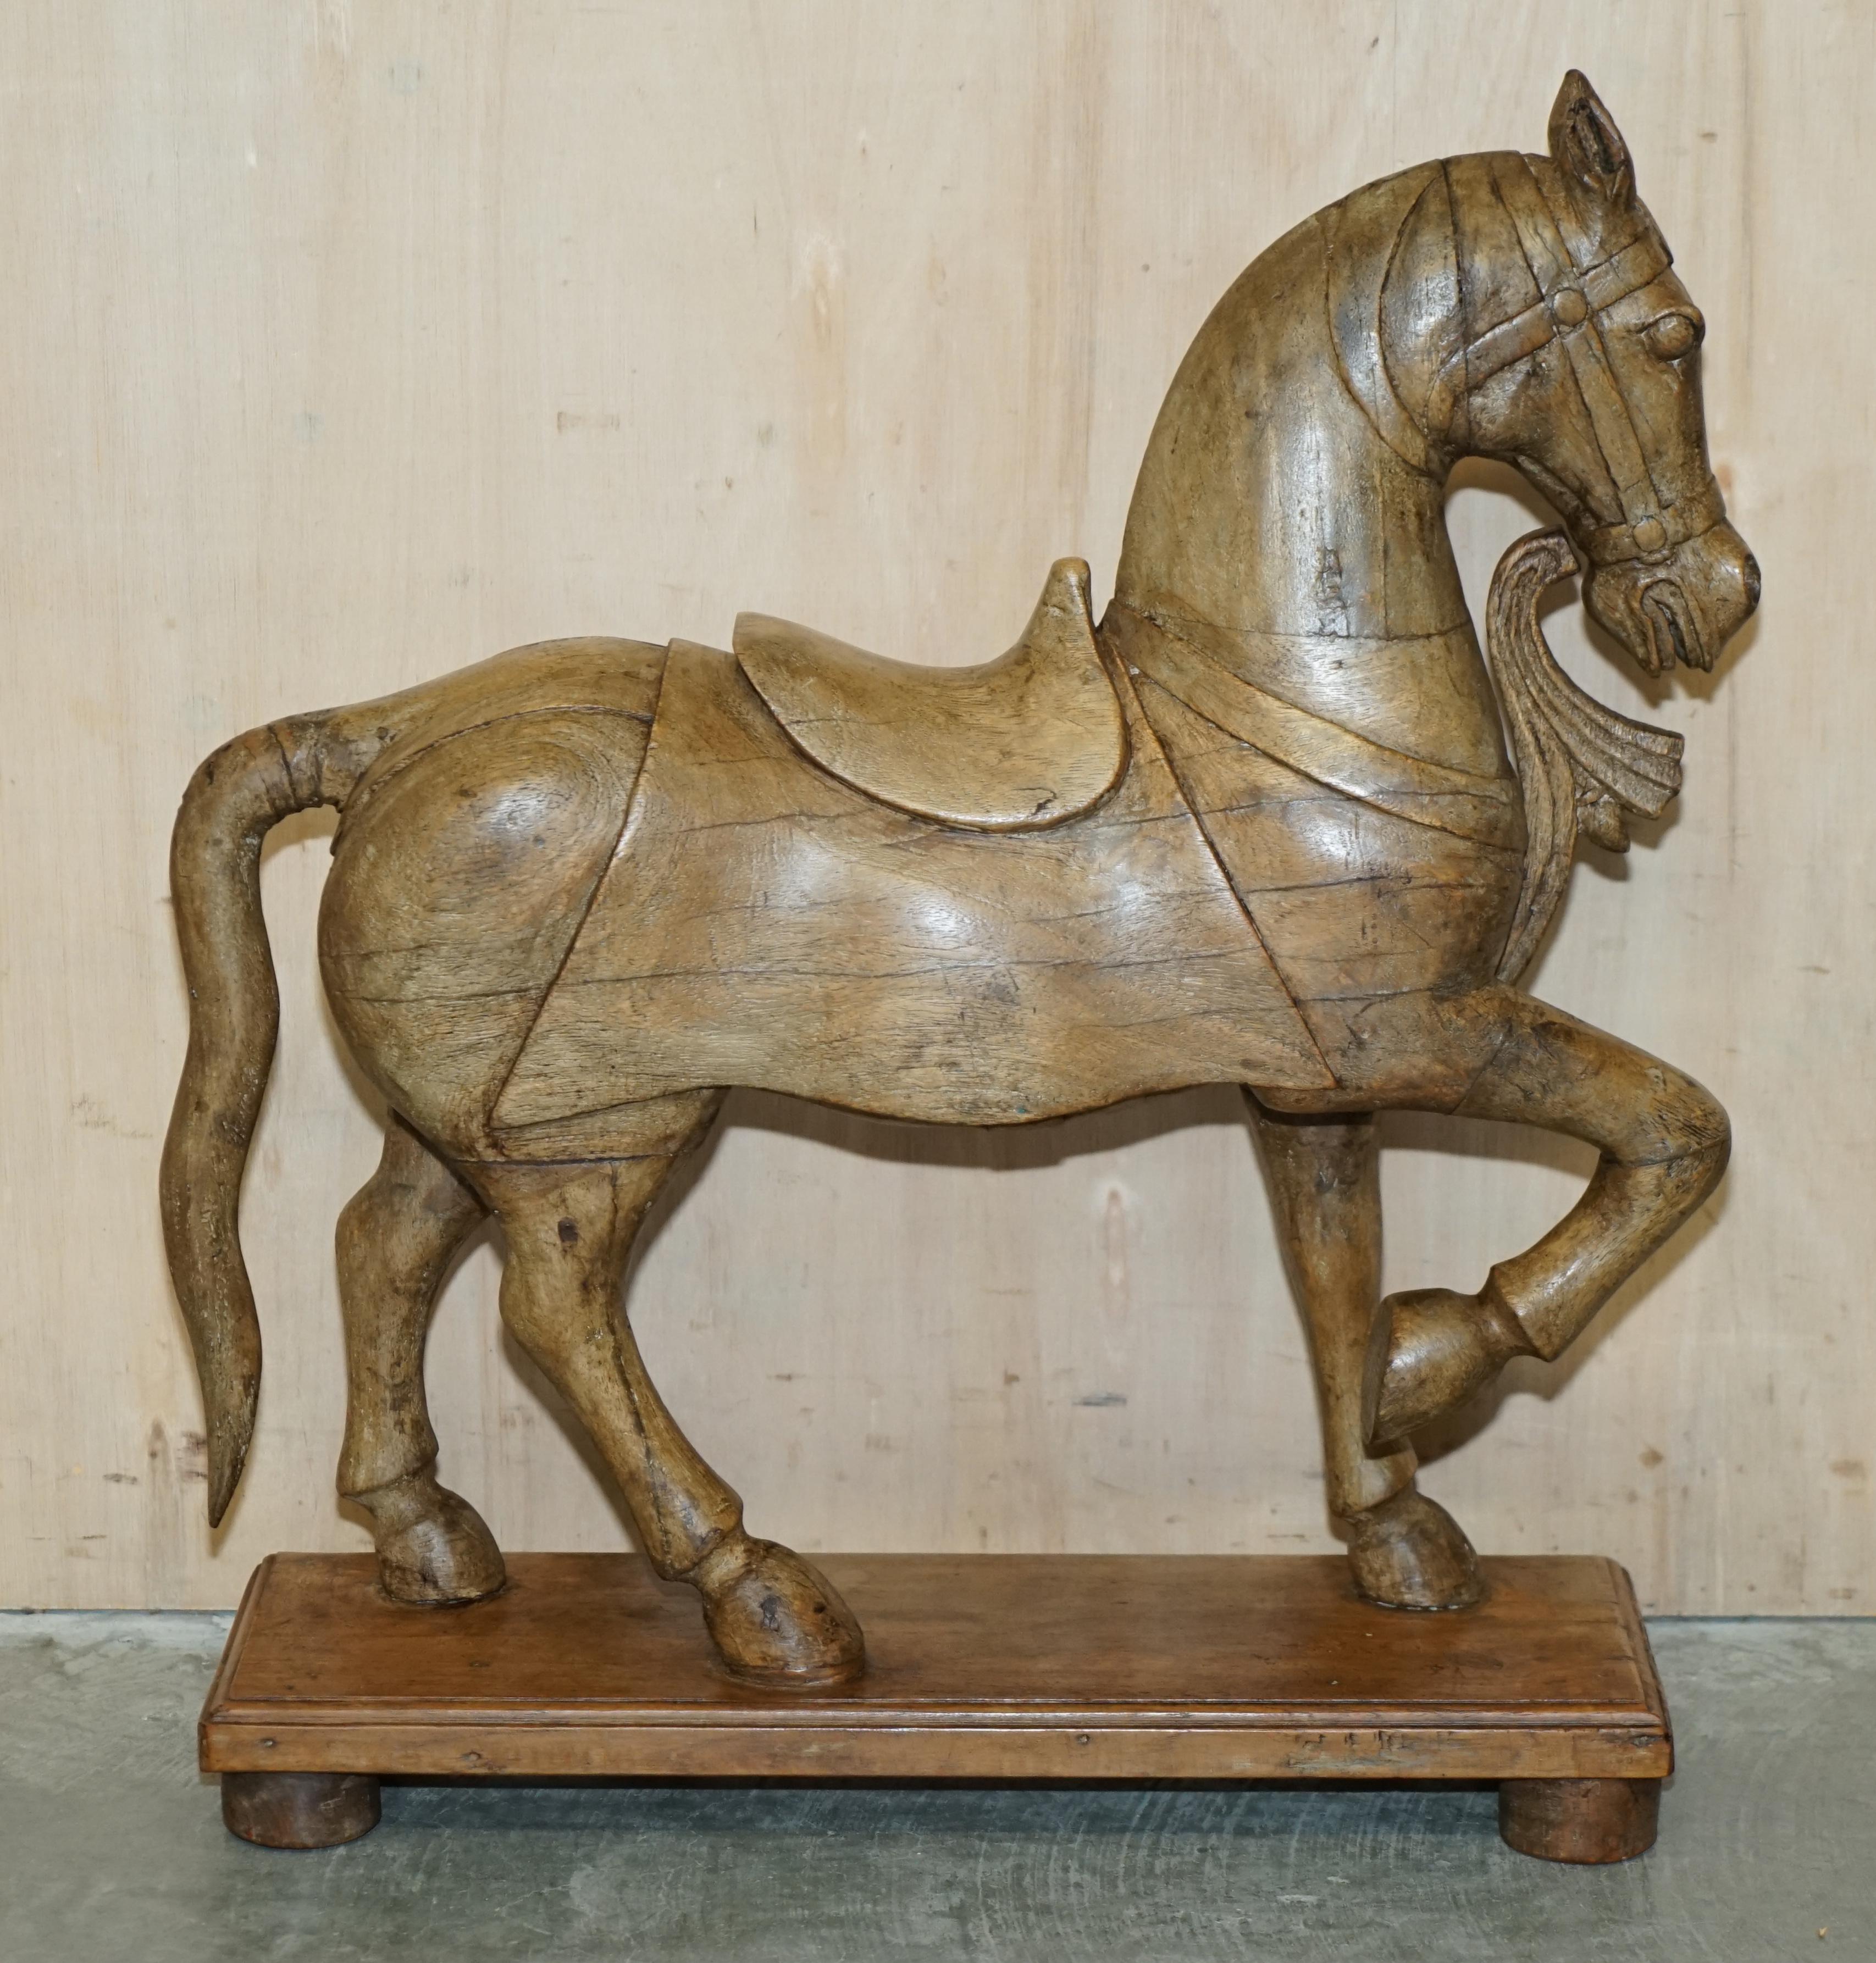 PAiR OF DECORATIVE ANTIQUE HAND CARved WOODEN STATUES OF A LOVELY HORSES (Hochviktorianisch) im Angebot